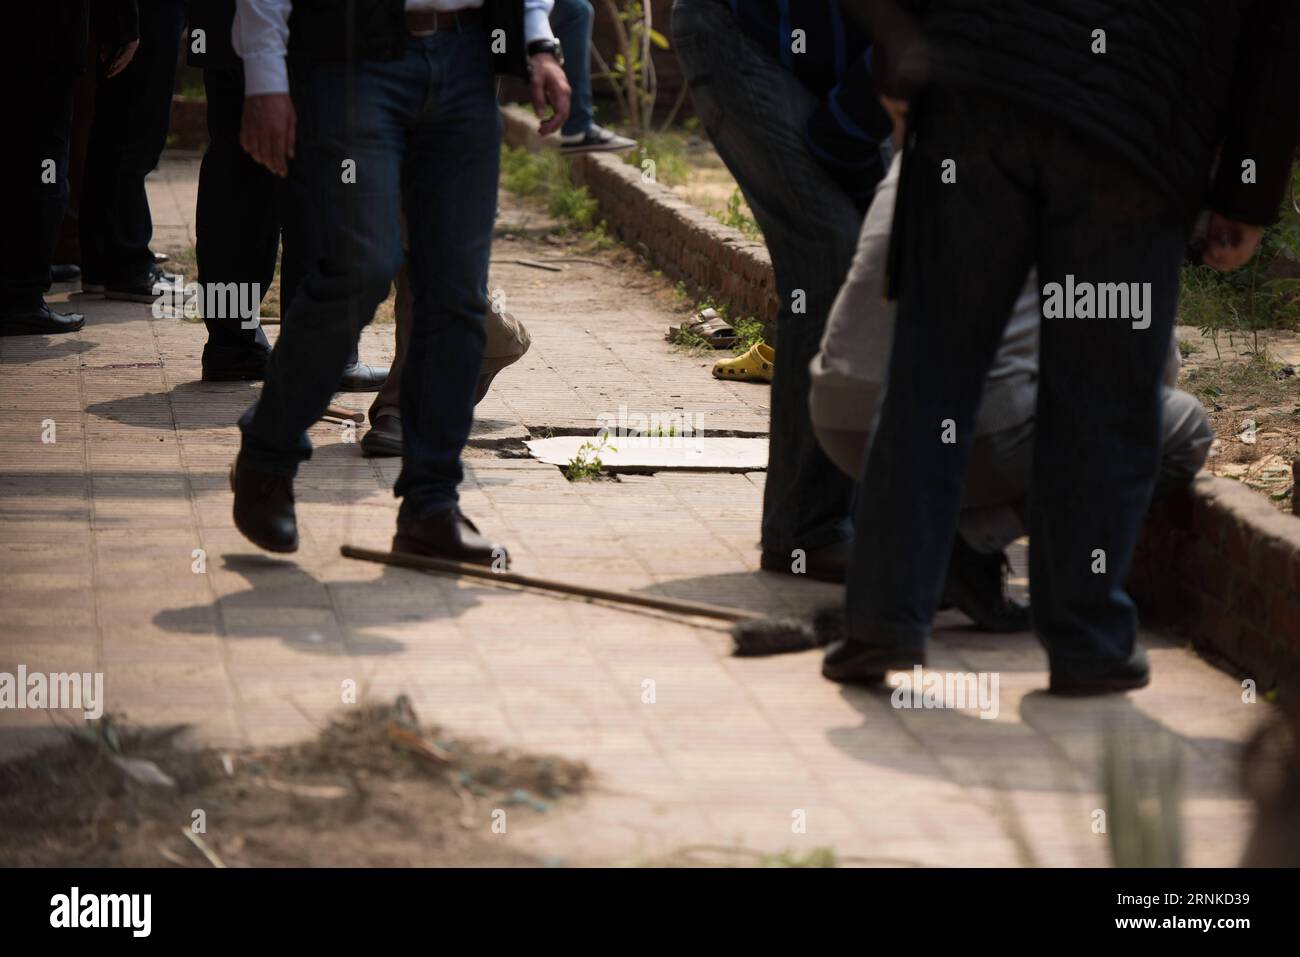 (170324) -- CAIRO, March 24, 2017 -- Policemen investigate at the explosion site at Maadi district in Cairo, Egypt, March 24, 2017. One person was killed and four others wounded on Friday when an explosive device went off in a garden in Maadi district southeastern the capital Cairo, the interior ministry said in a statement. ) (zw) EGYPT-CAIRO-BLAST MengxTao PUBLICATIONxNOTxINxCHN   Cairo March 24 2017 Policemen Investigate AT The Explosion Site AT Maadi District in Cairo Egypt March 24 2017 One Person what KILLED and Four Others Wounded ON Friday When to Explosive Device Went off in a Garden Stock Photo